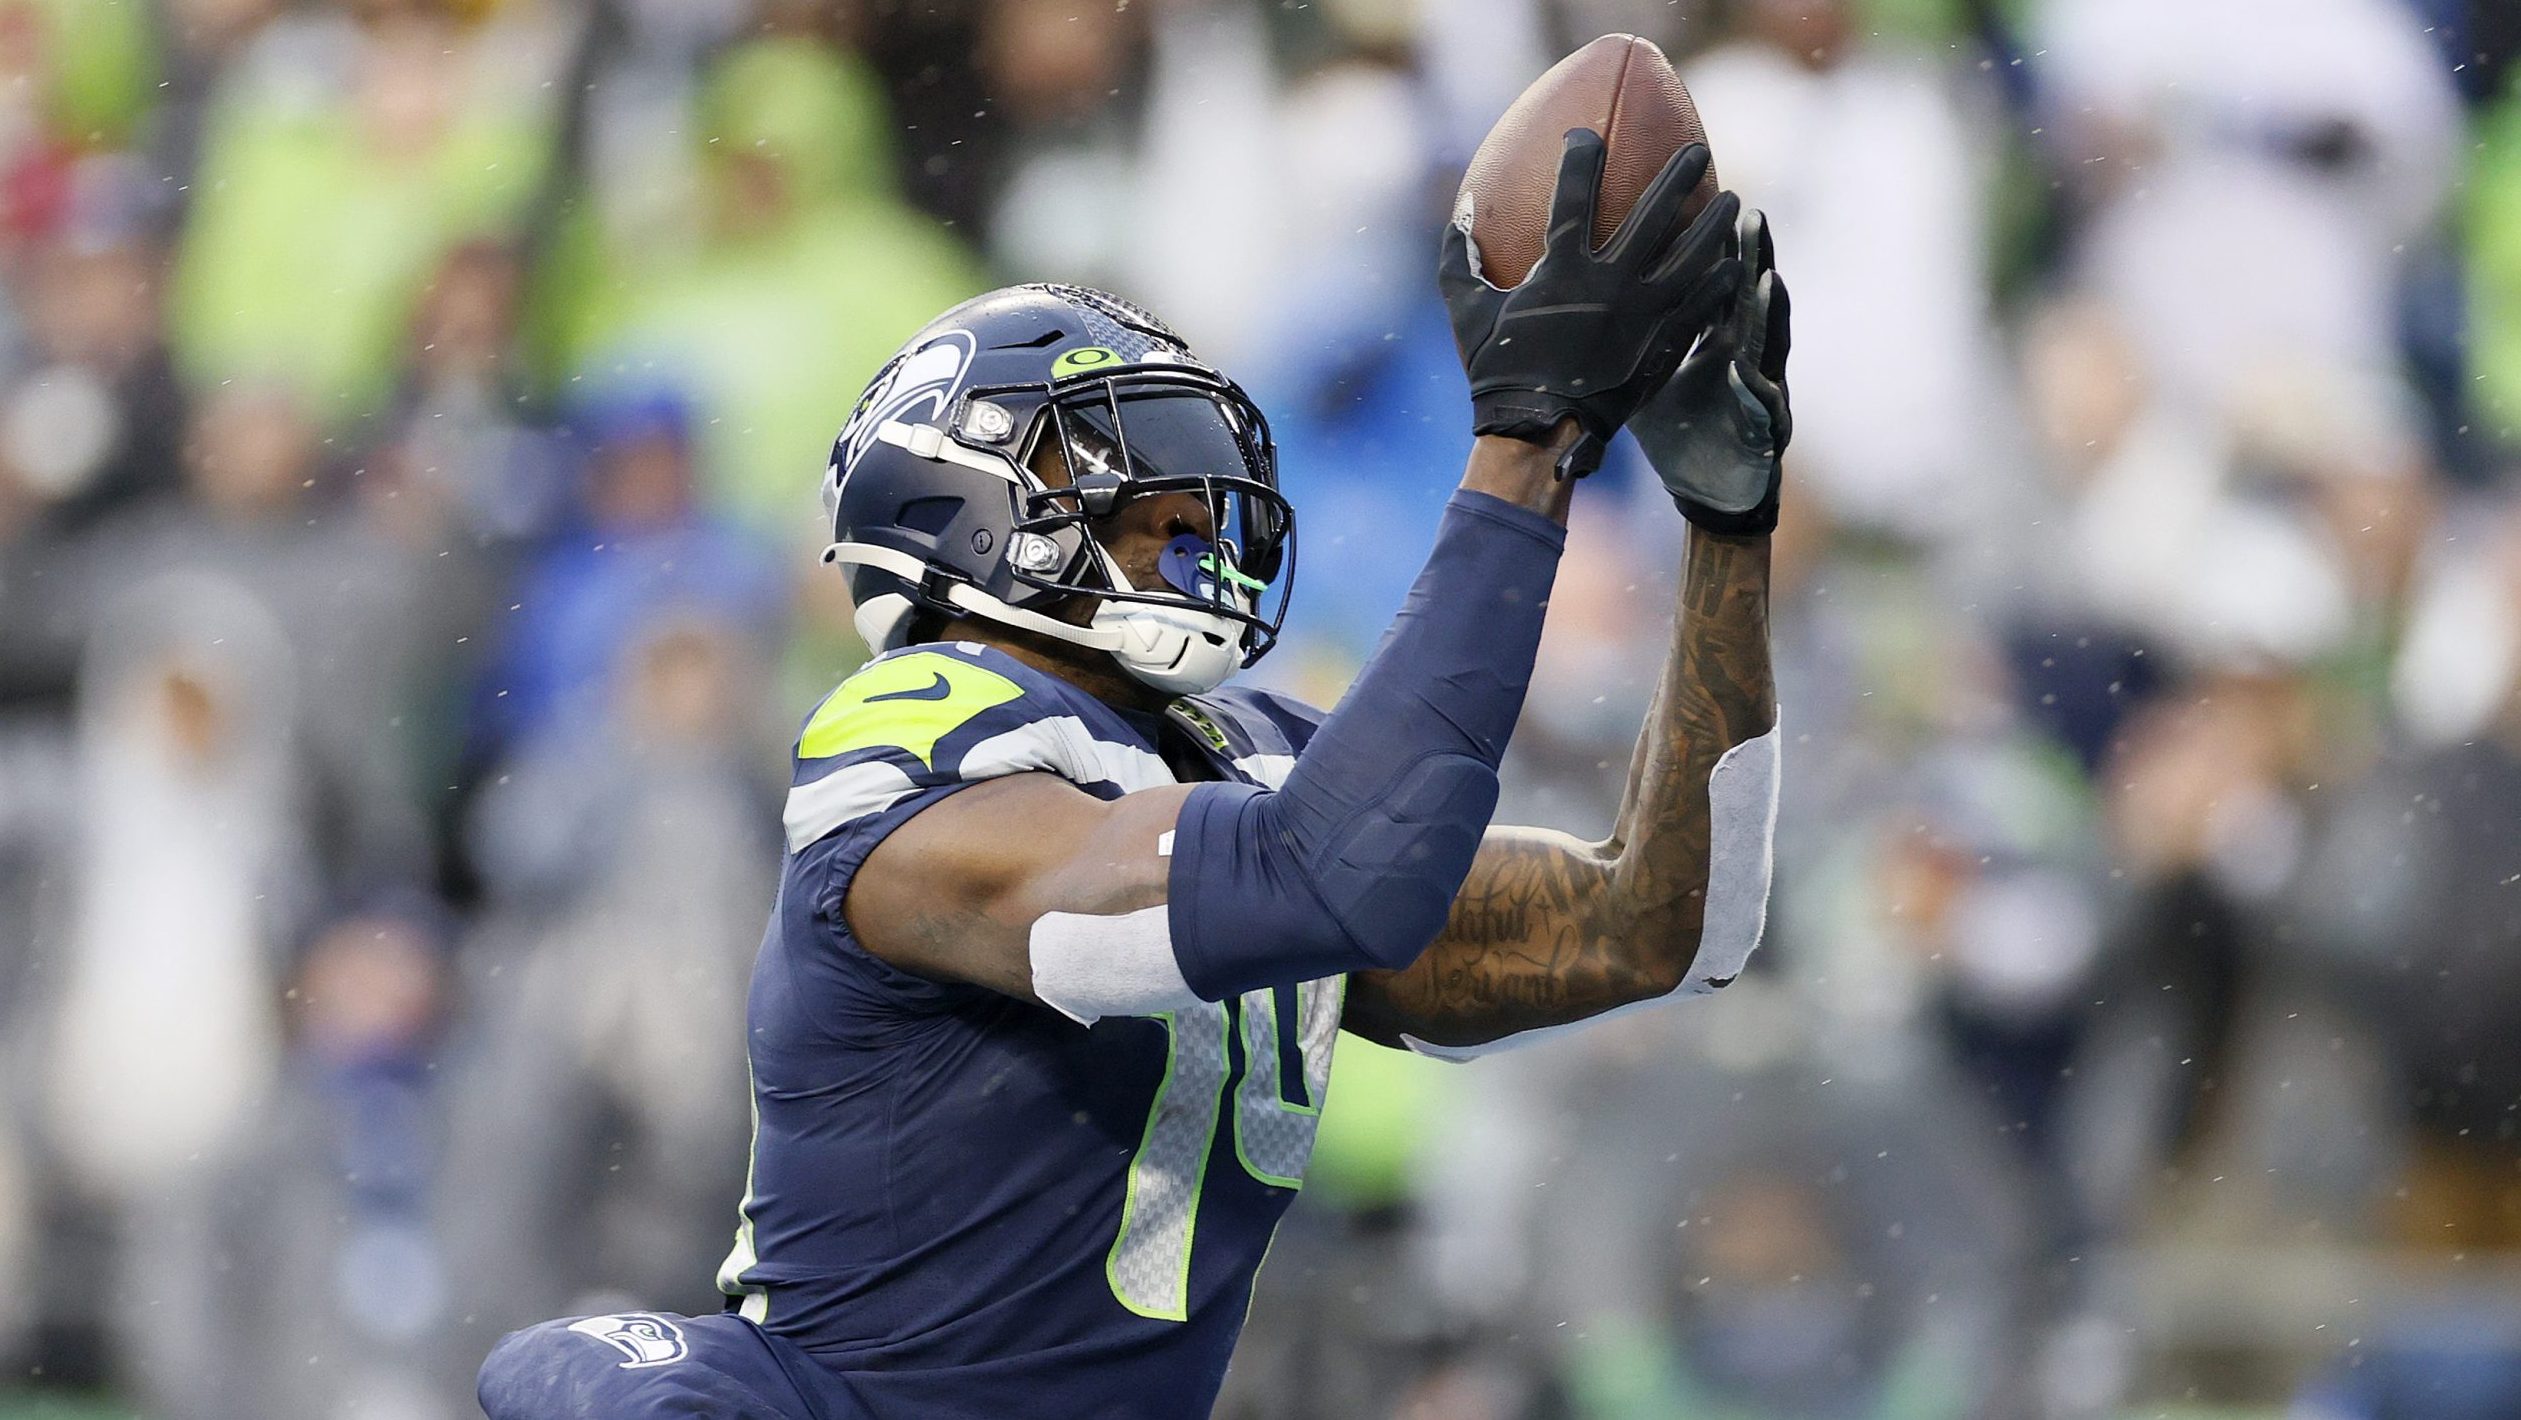 DK Metcalf #14 of the Seattle Seahawks catches a pass for a touchdown against the Detroit Lions dur...